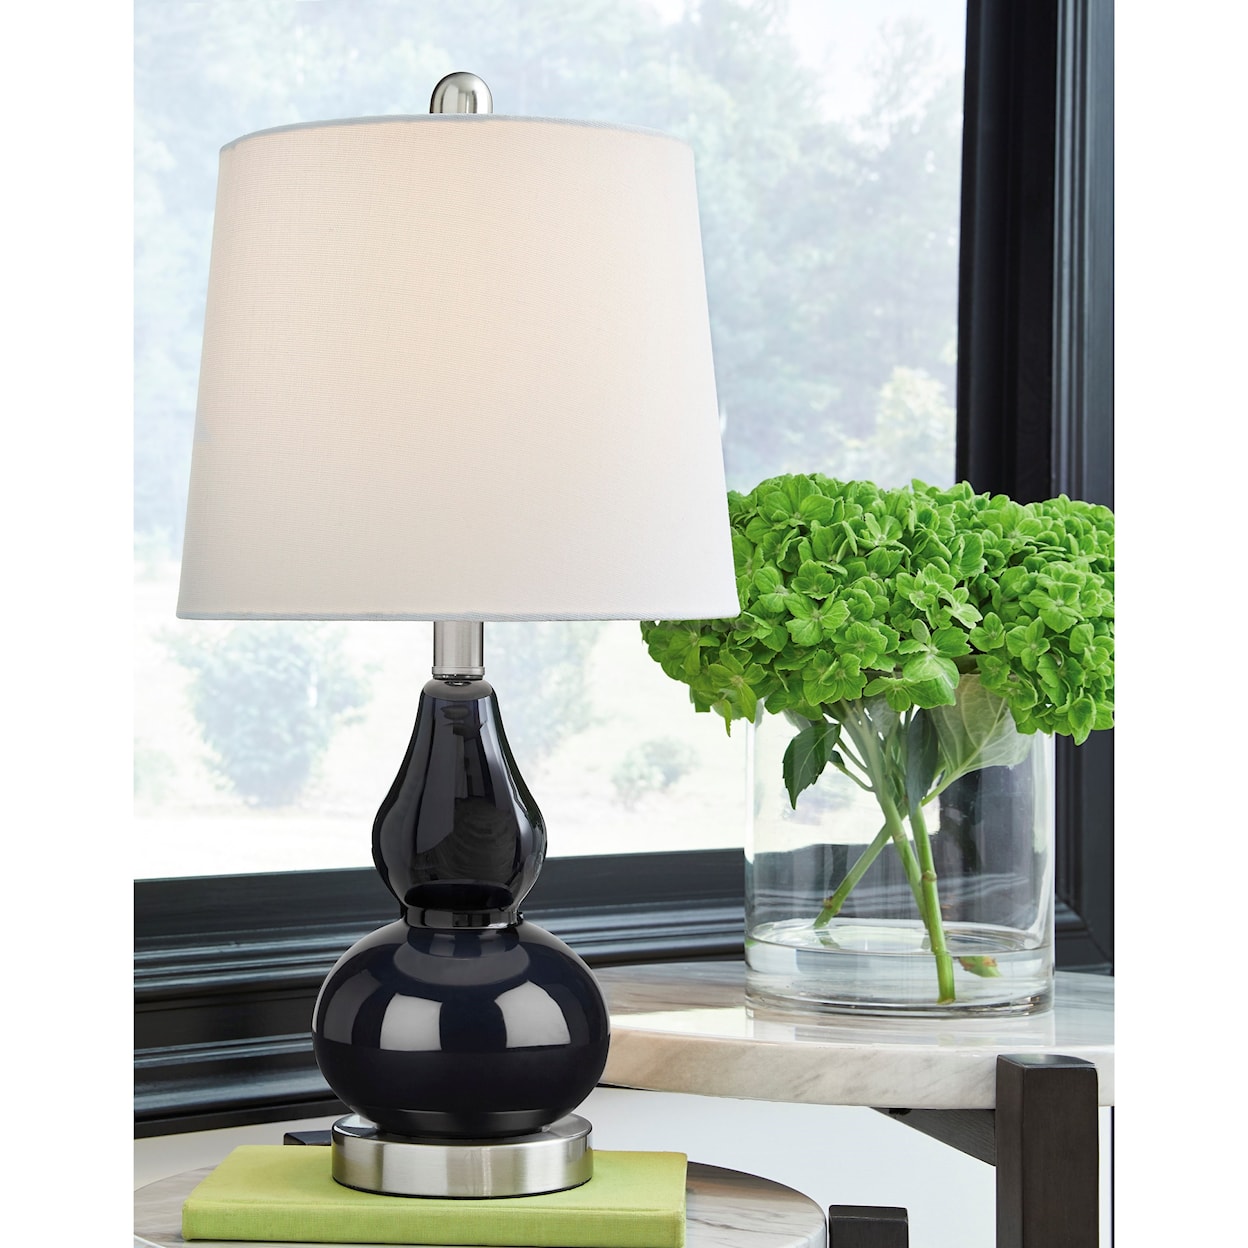 Ashley Furniture Signature Design Lamps - Contemporary Makana Navy/Silver Glass Table Lamp